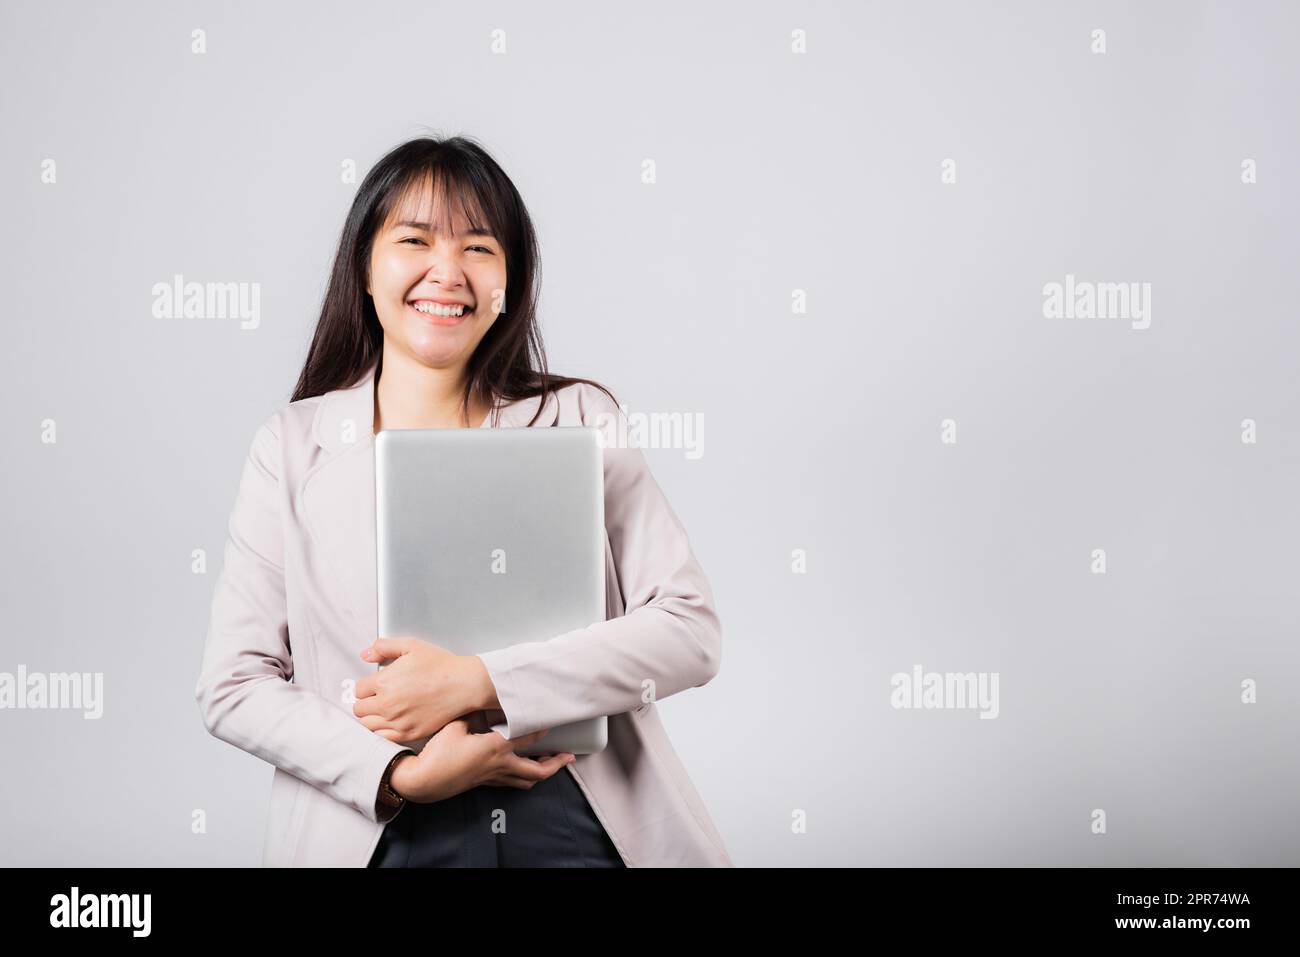 Front view woman smiling confident smiling holding closed laptop Stock Photo